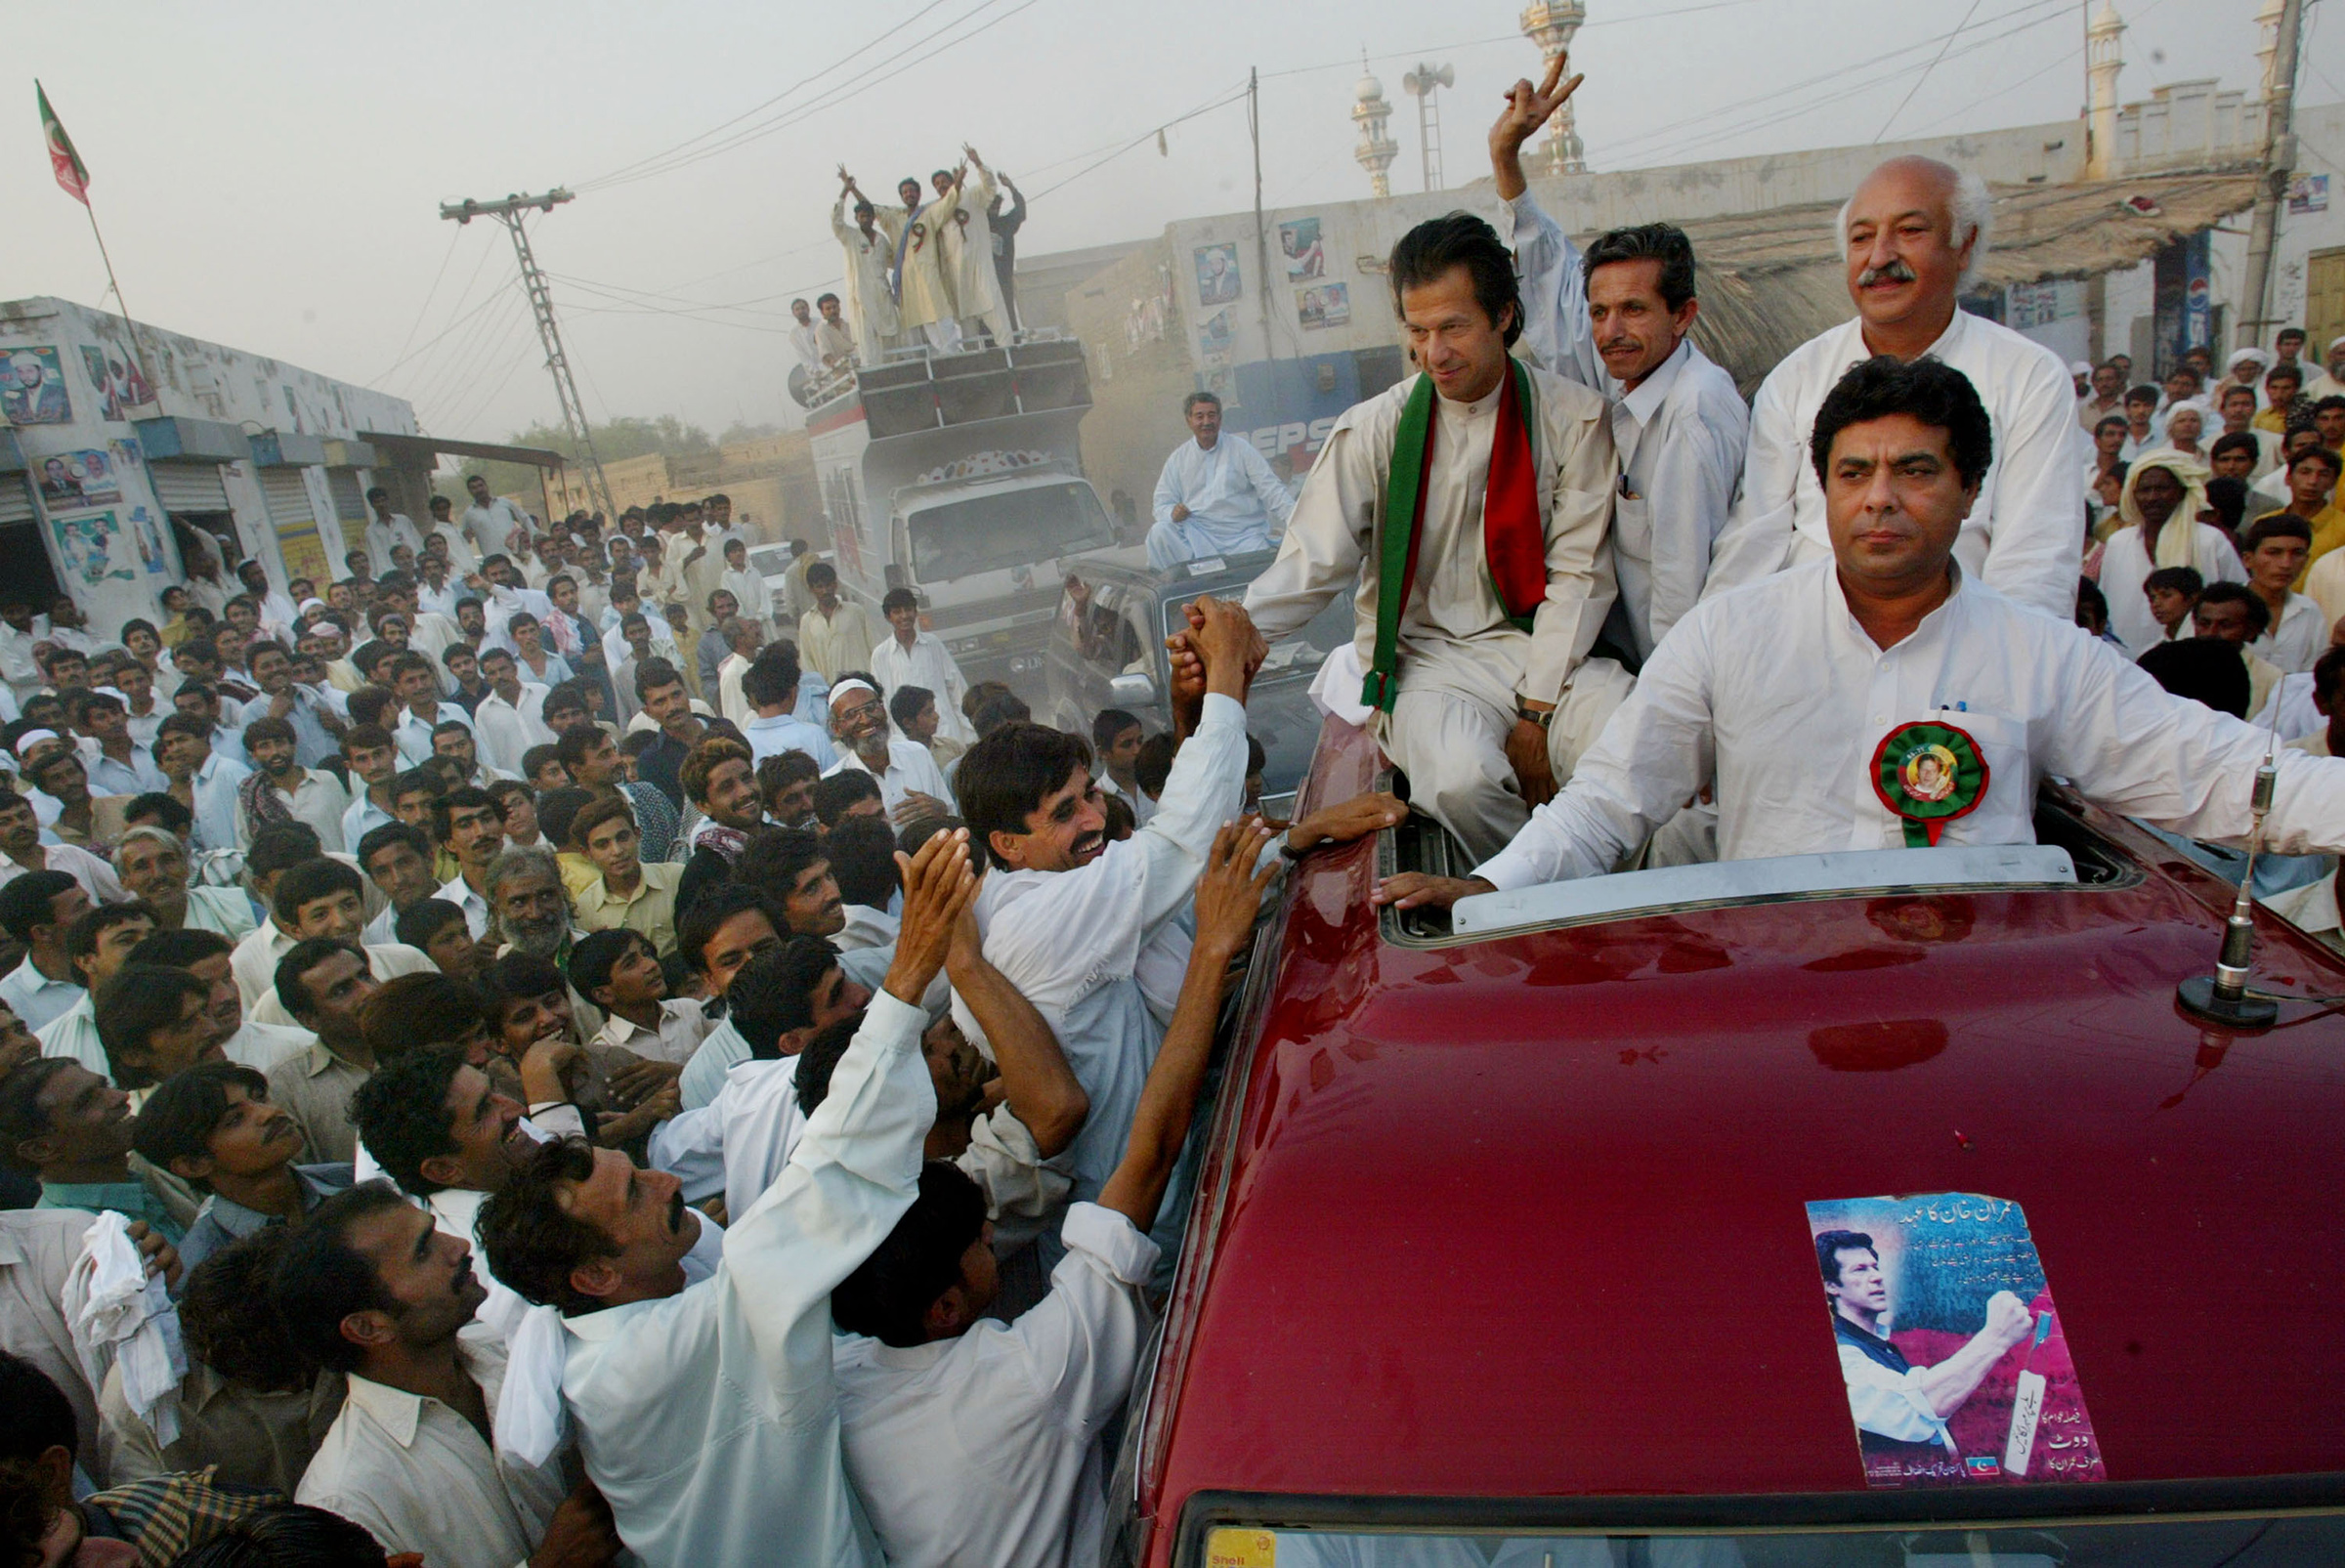 Cricket captain turned politician Imran Khan shakes hands with supporters during a rally in October 2002 in Shadi Khal, Pakistan. (Paula Bronstein—Getty Images)